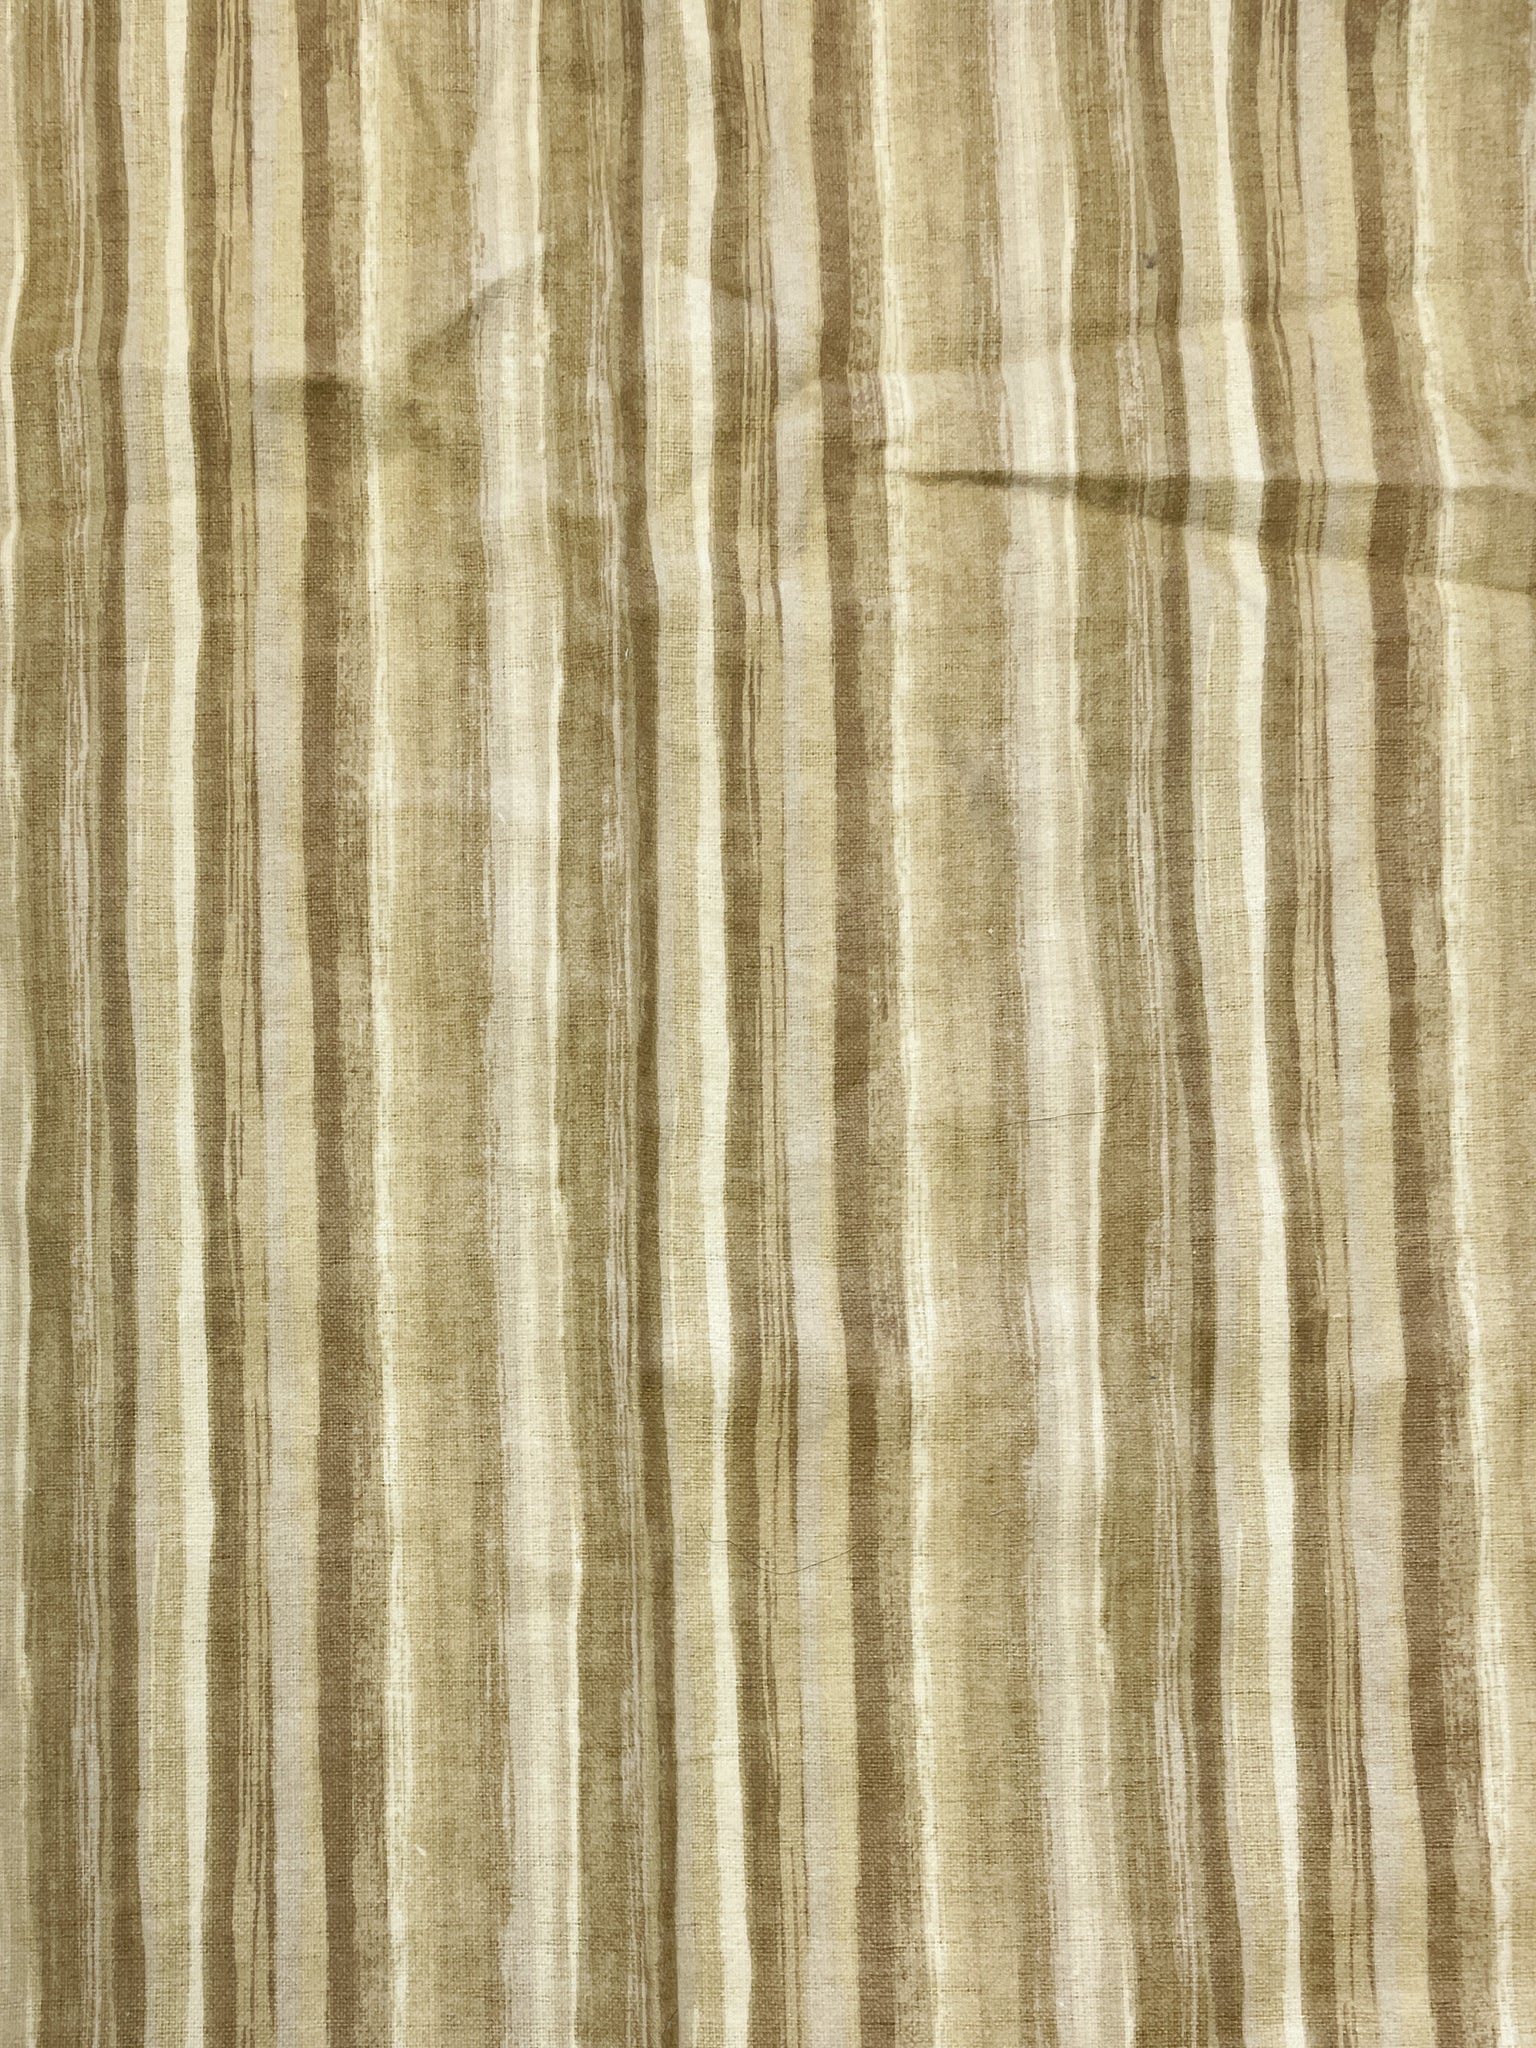 1 1/4 YD Cotton Flannel - Striated Stripes in Tans